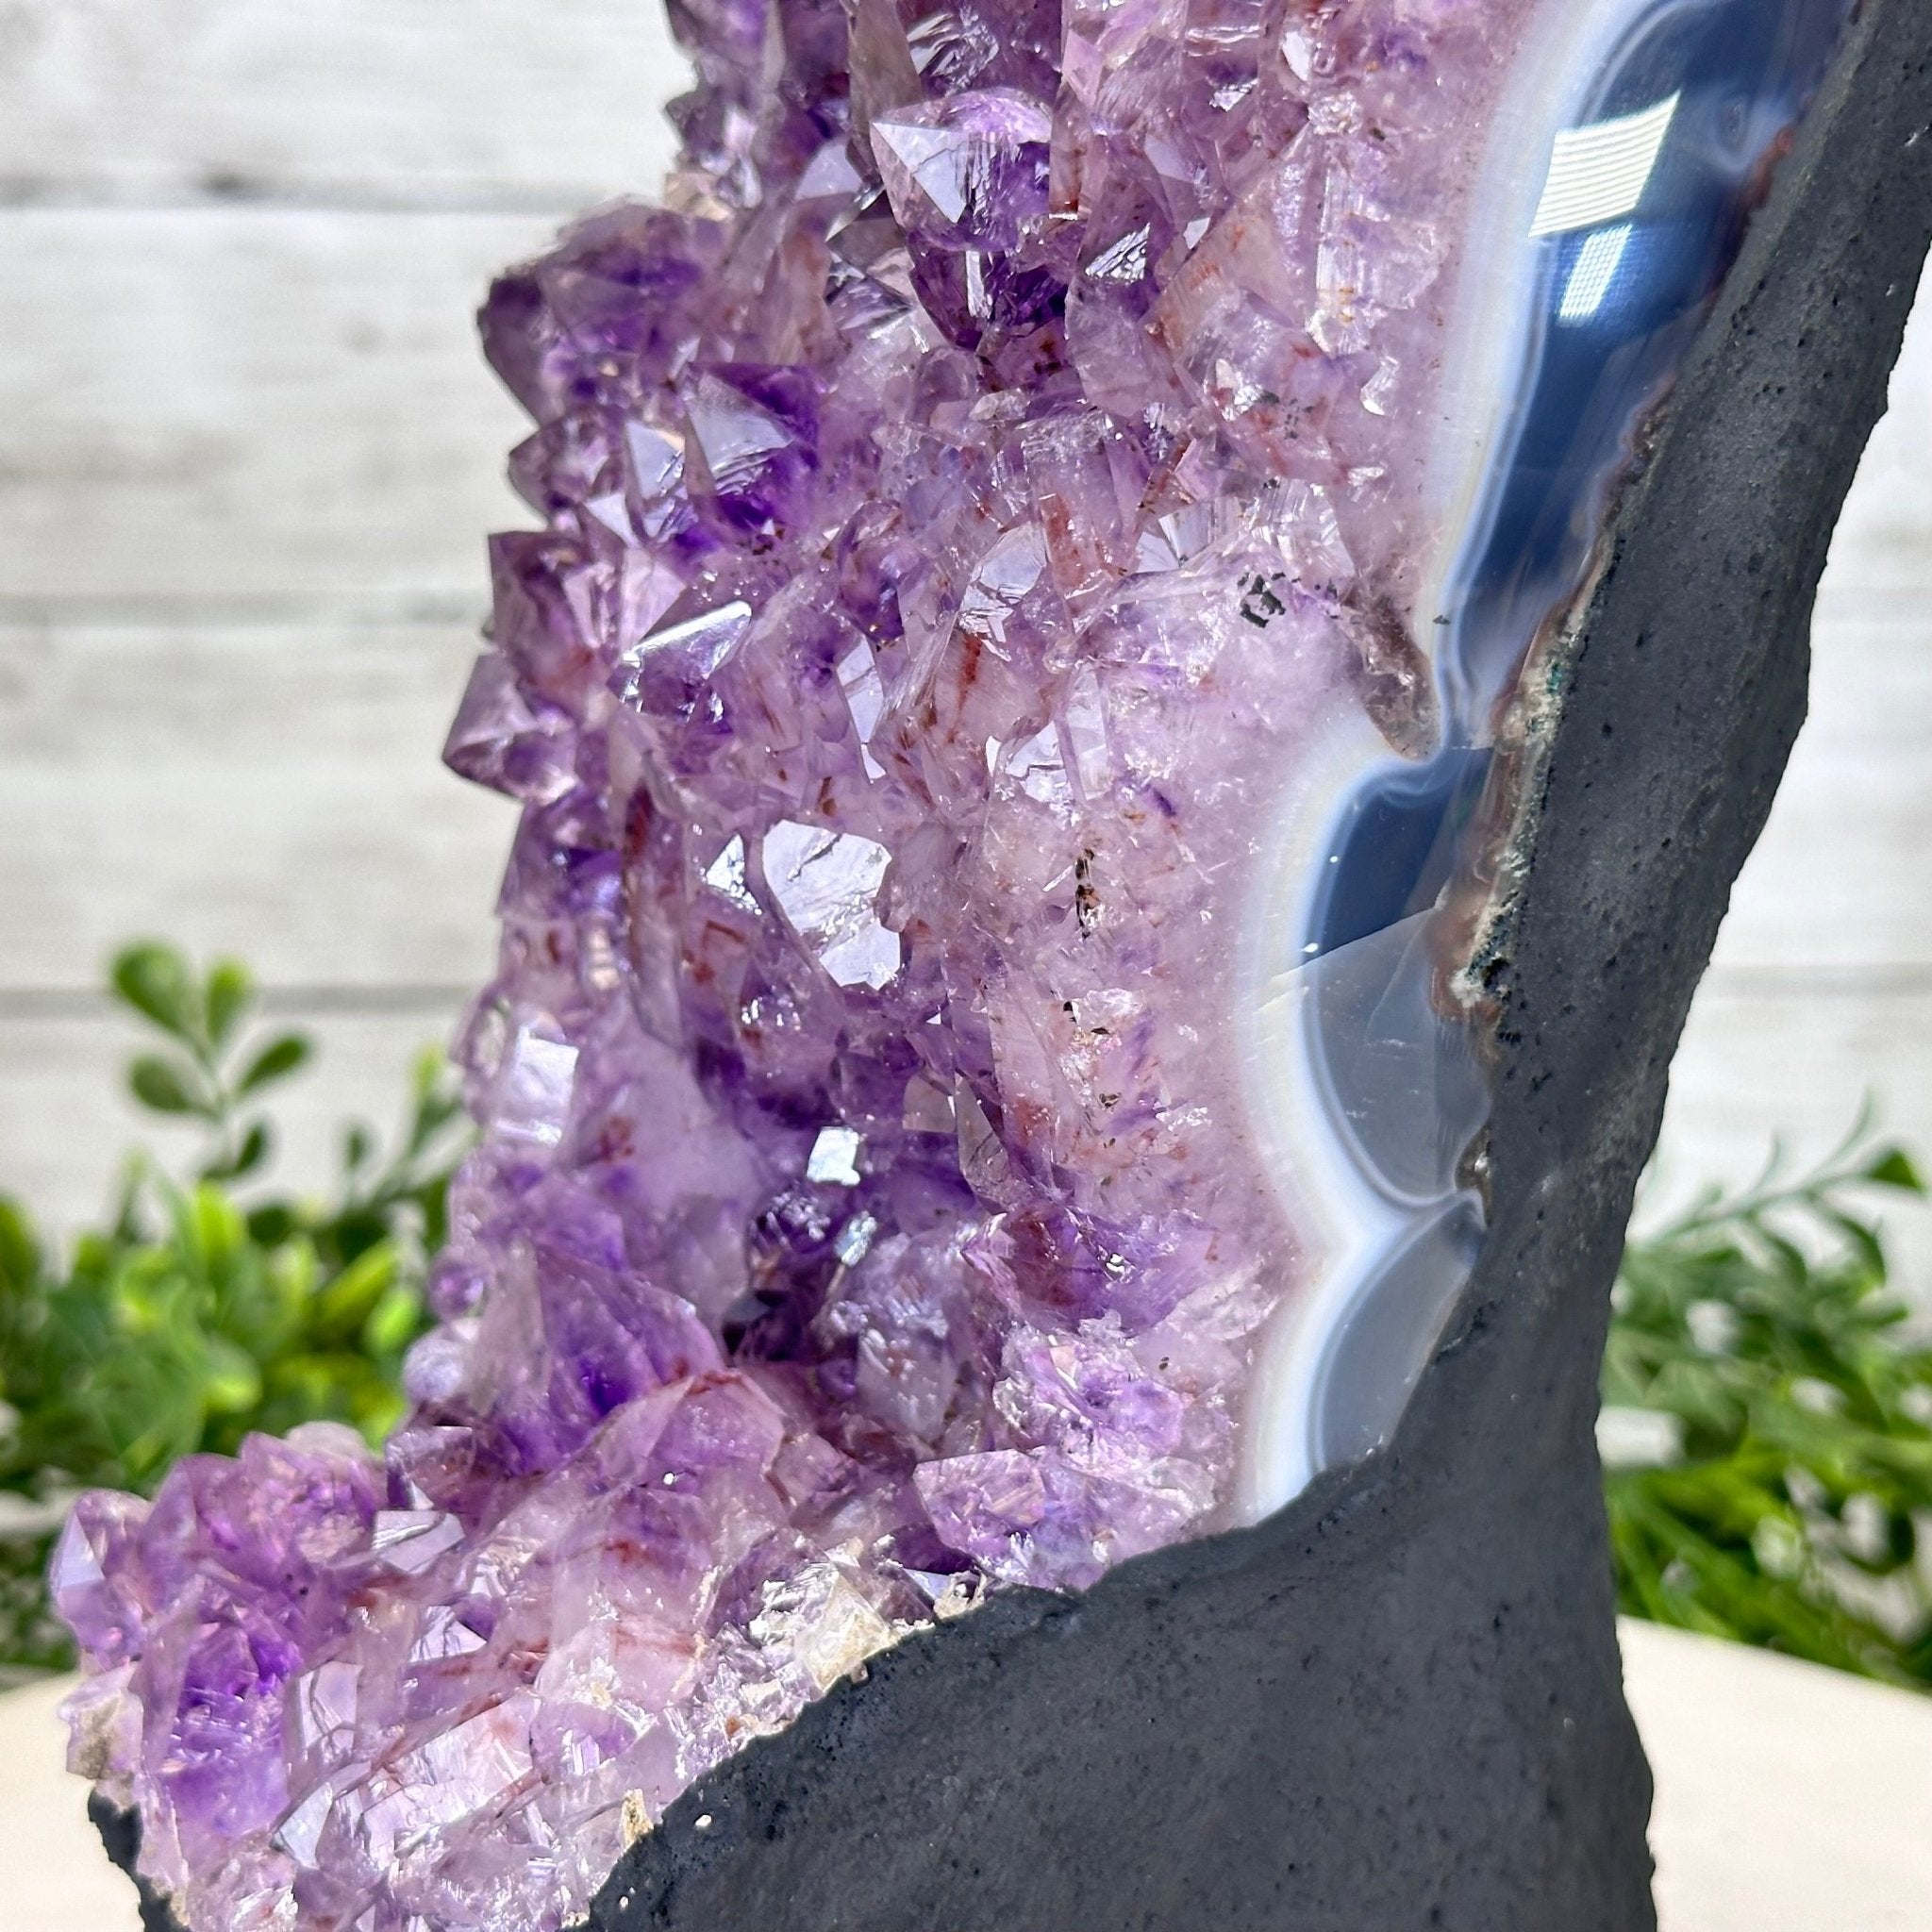 Extra Quality Amethyst Cluster on Cement Base, 12.8 lbs and 11.75" Tall #5614-0103 - Brazil GemsBrazil GemsExtra Quality Amethyst Cluster on Cement Base, 12.8 lbs and 11.75" Tall #5614-0103Clusters on Cement Bases5614-0103